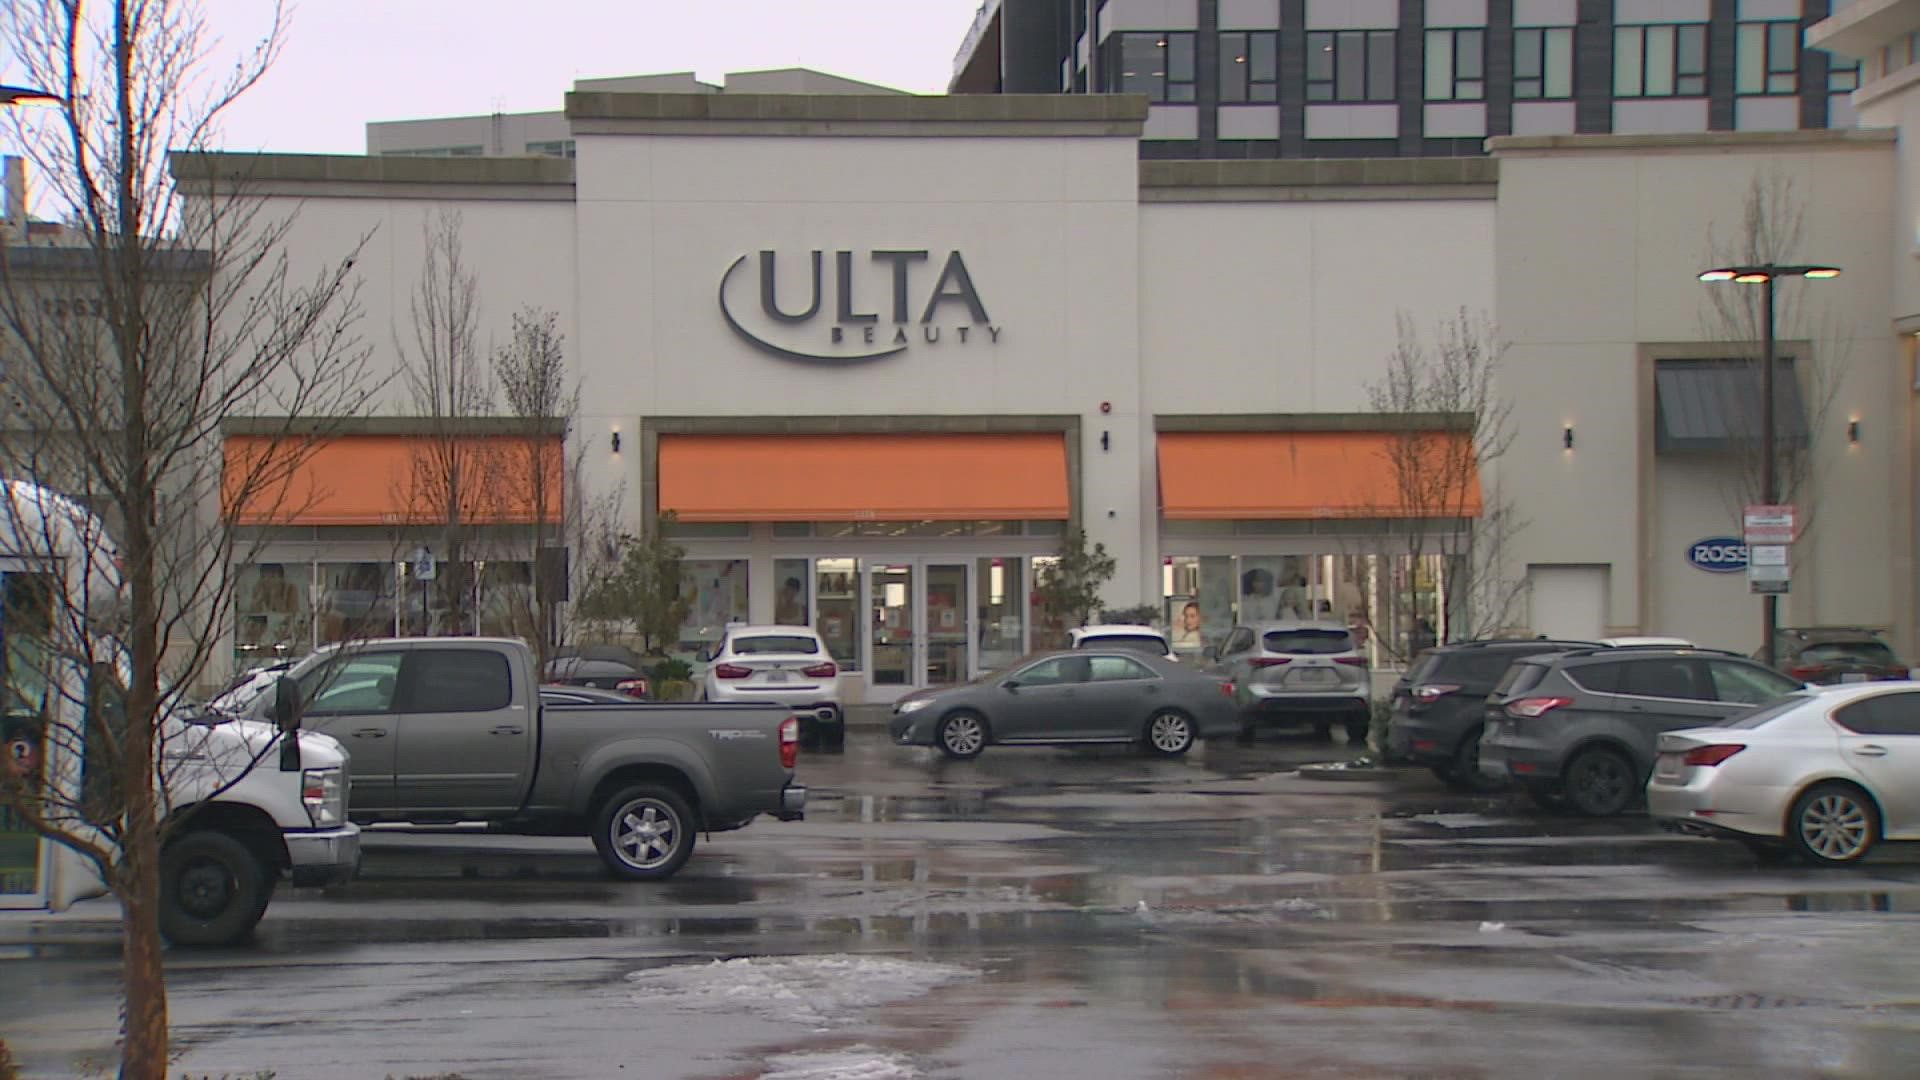 Three suspects allegedly loaded up bags with more than $4,000 worth of items at an Ulta Beauty in Kirkland.